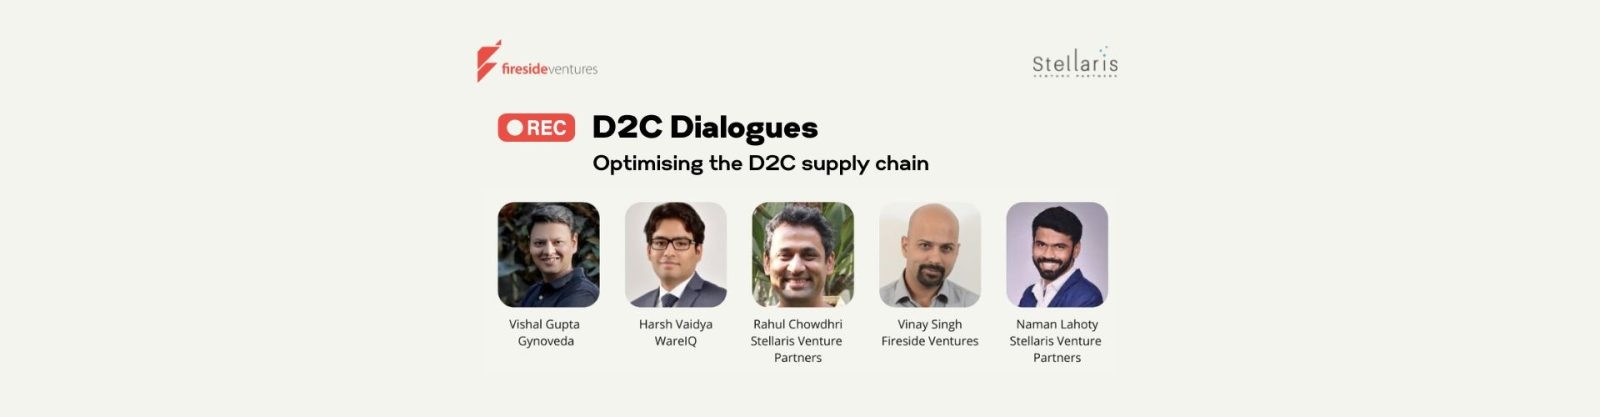 D2C Dialogues #6: Optimising the D2C supply chain